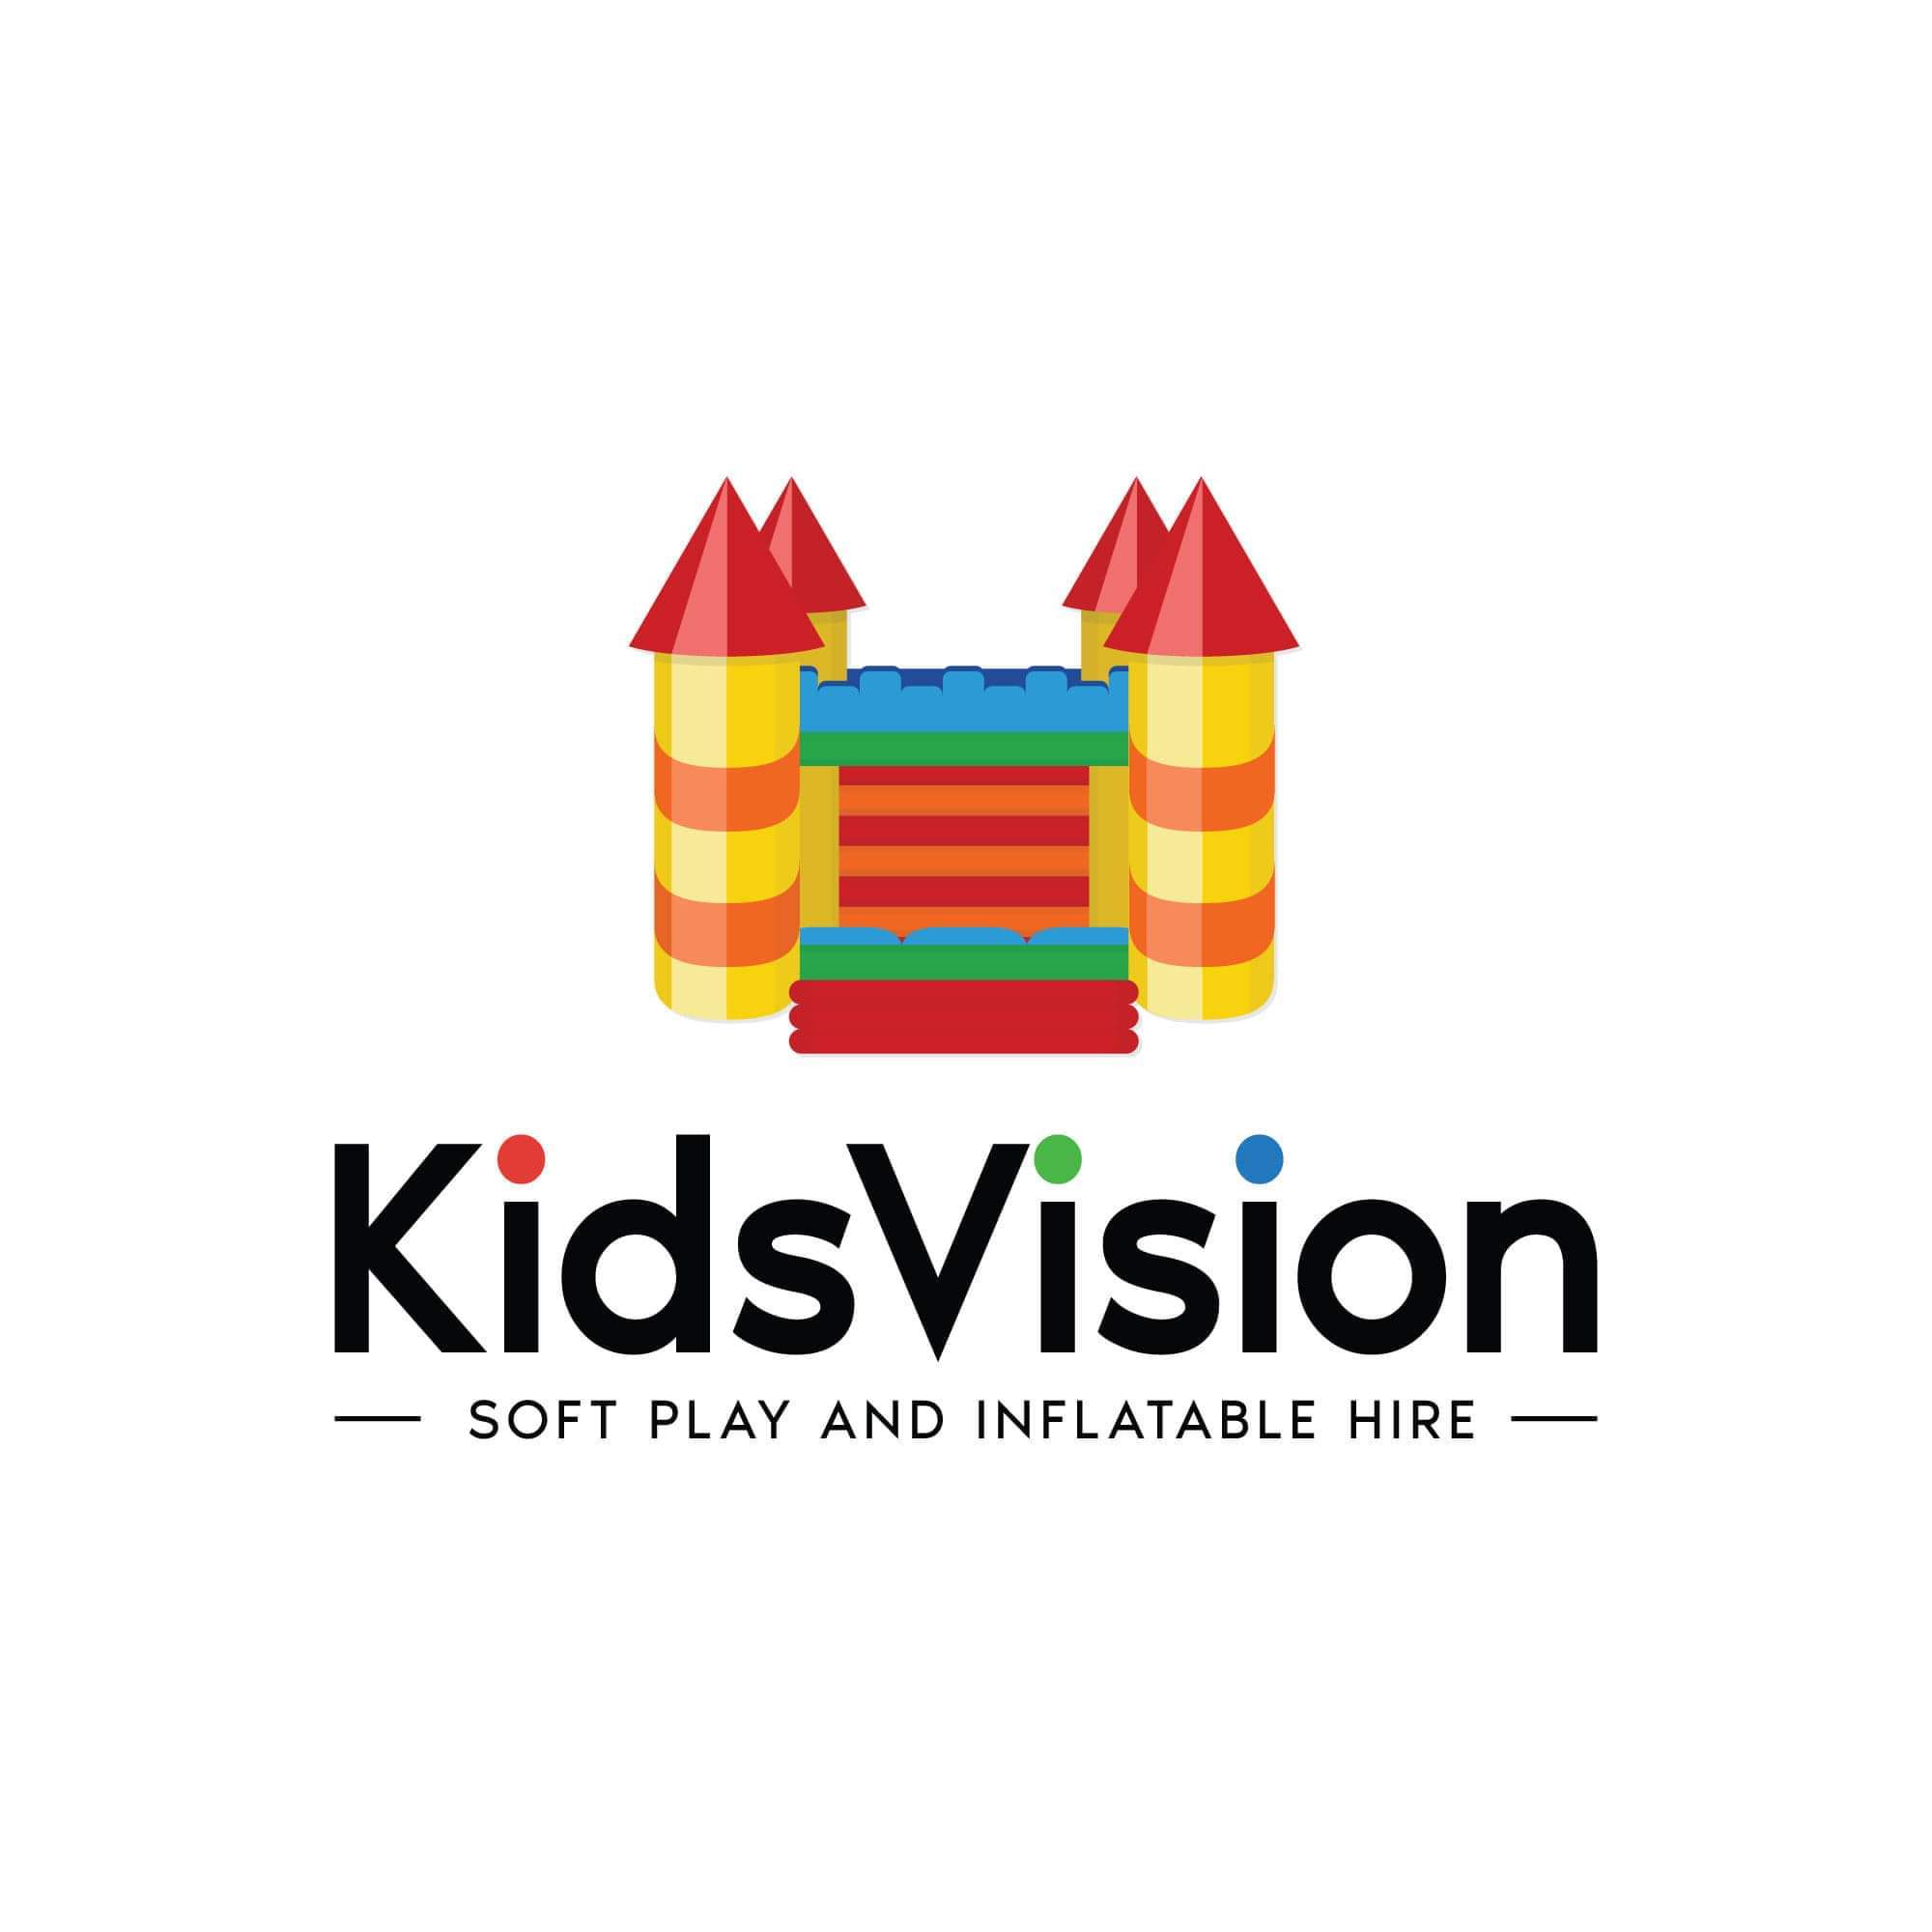 Kidsvision soft play and inflatables